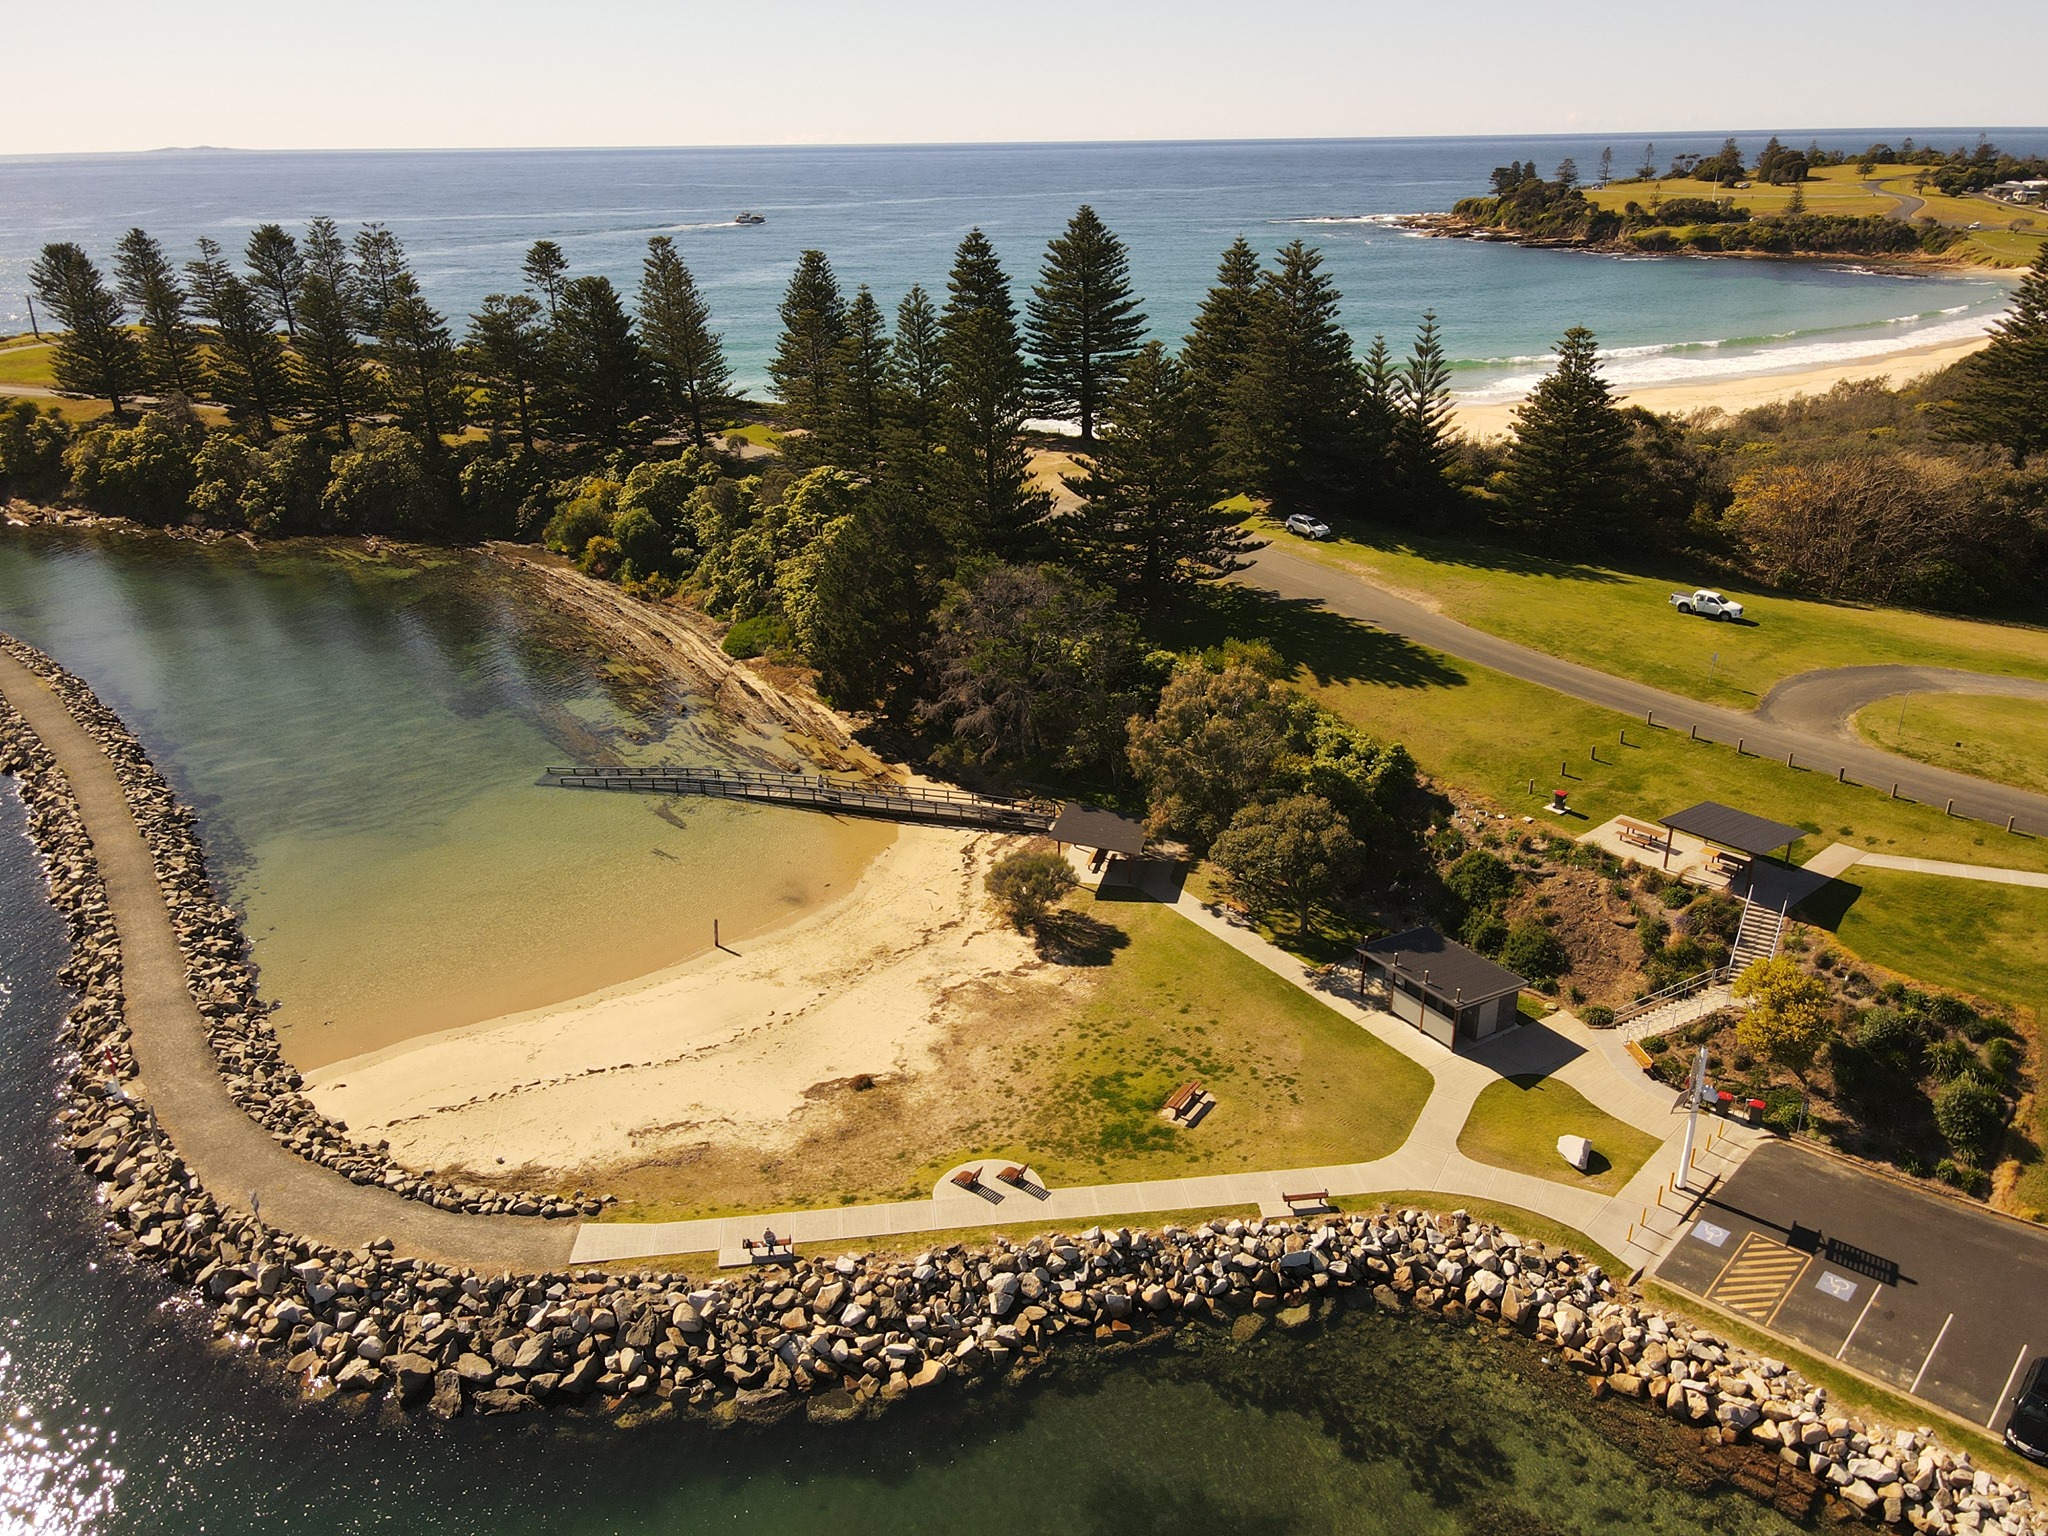 Bermagui ocean pool made accessible for people of all abilities